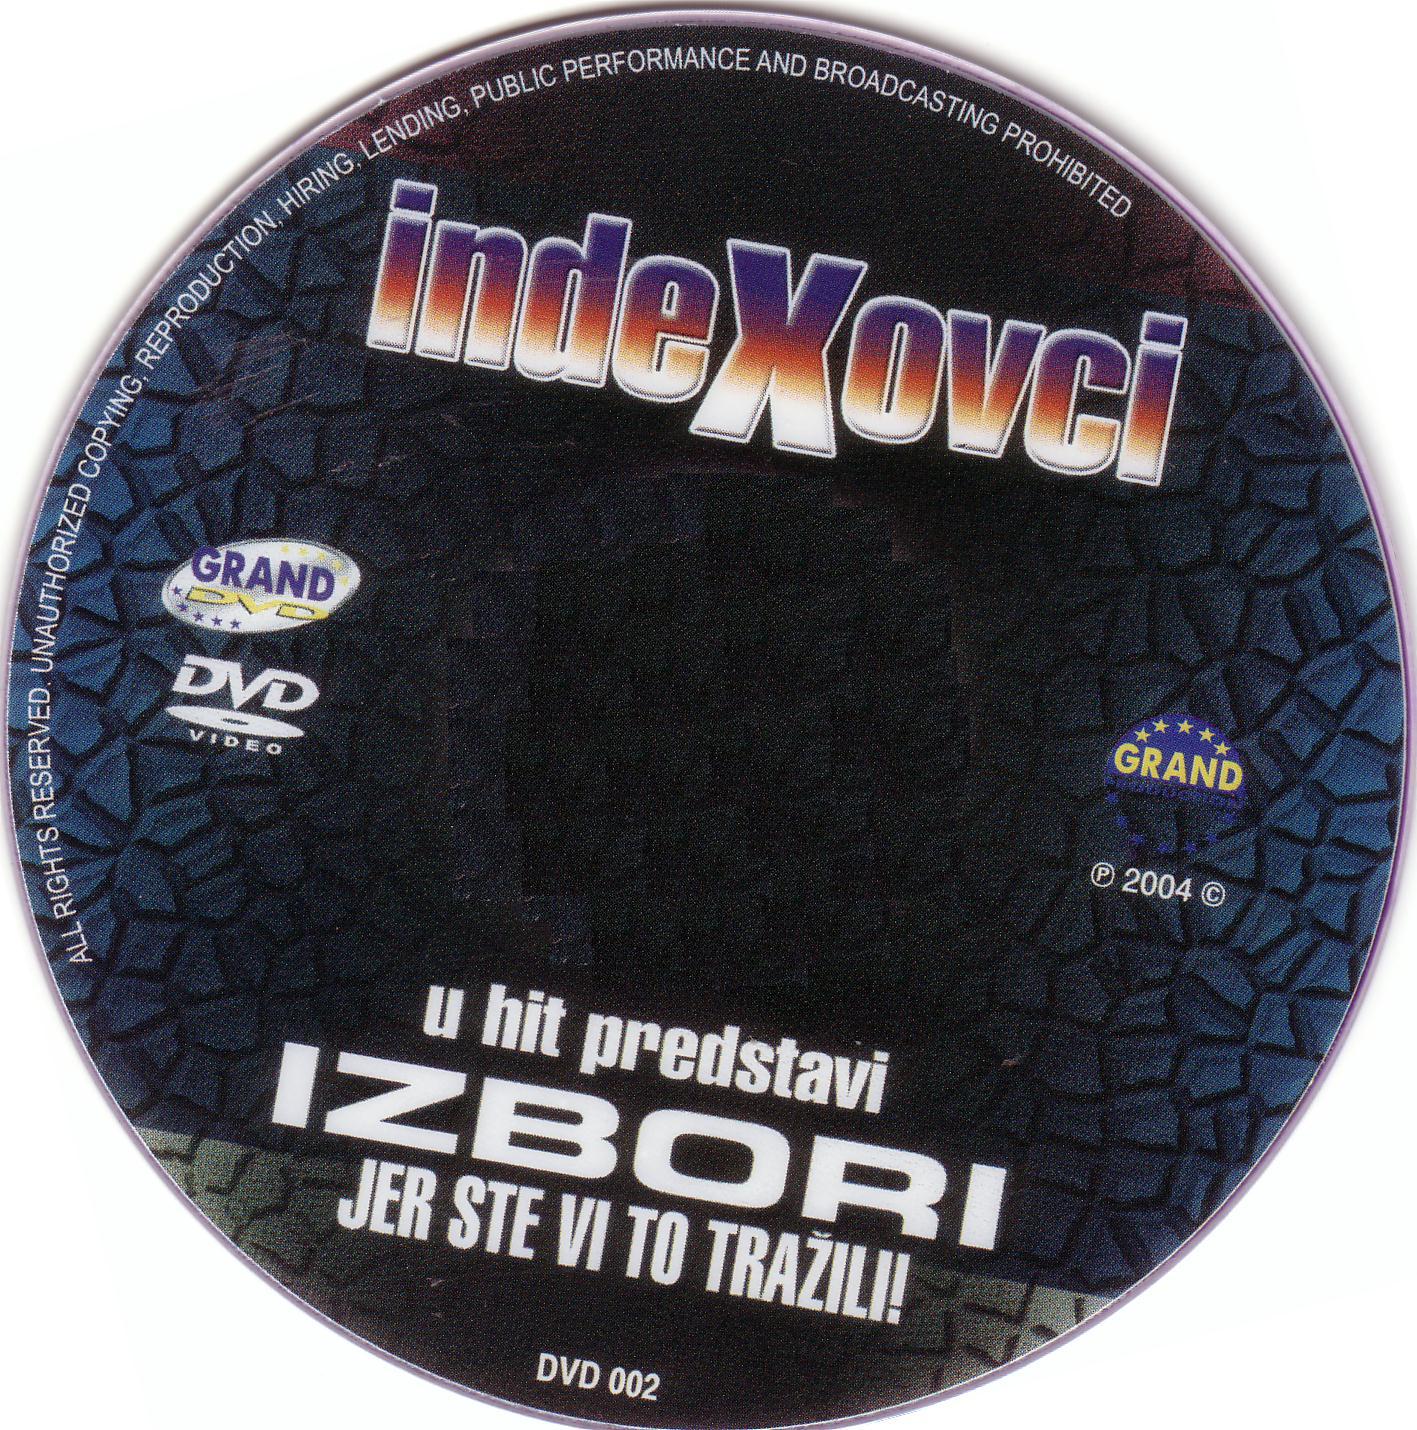 Click to view full size image -  DVD Cover - I - DVD - INDEXOVCI - CD - DVD - INDEXOVCI - CD.JPG